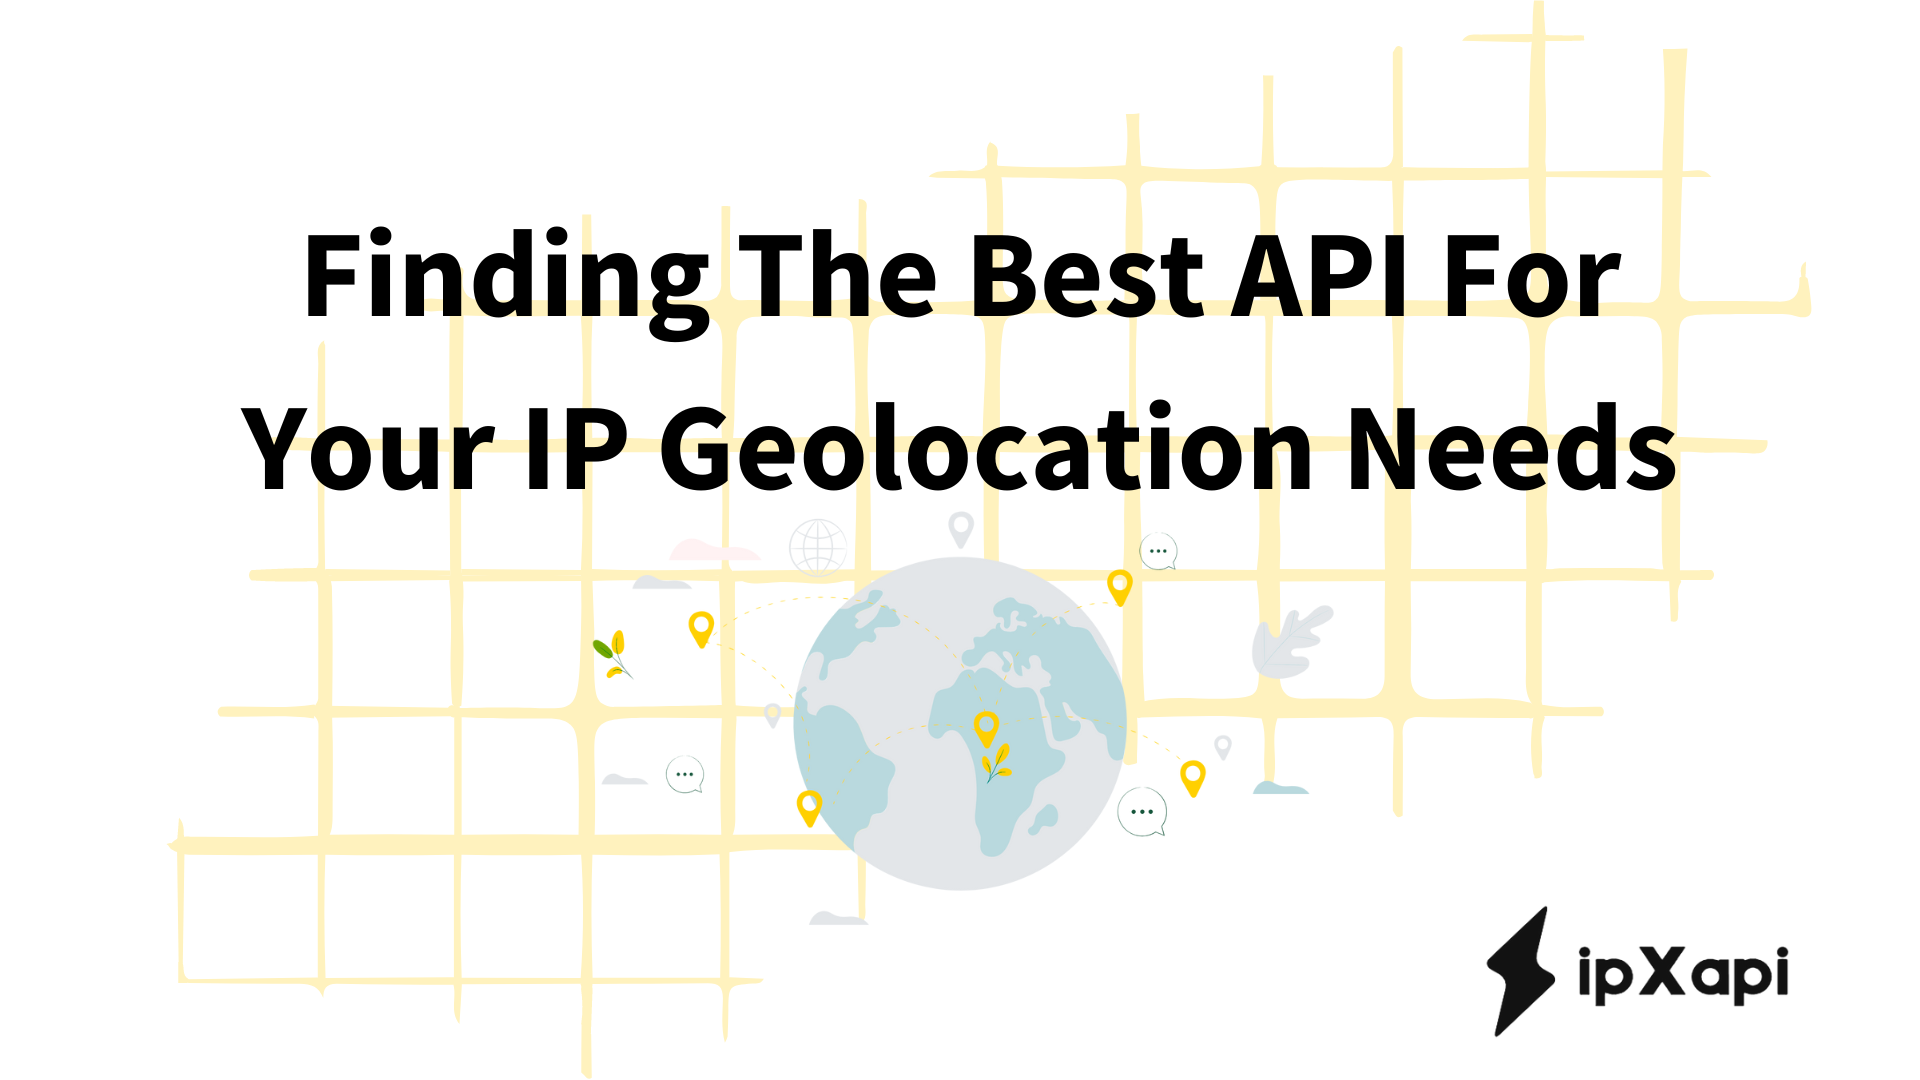 Finding The Best API For Your IP Geolocation Needs